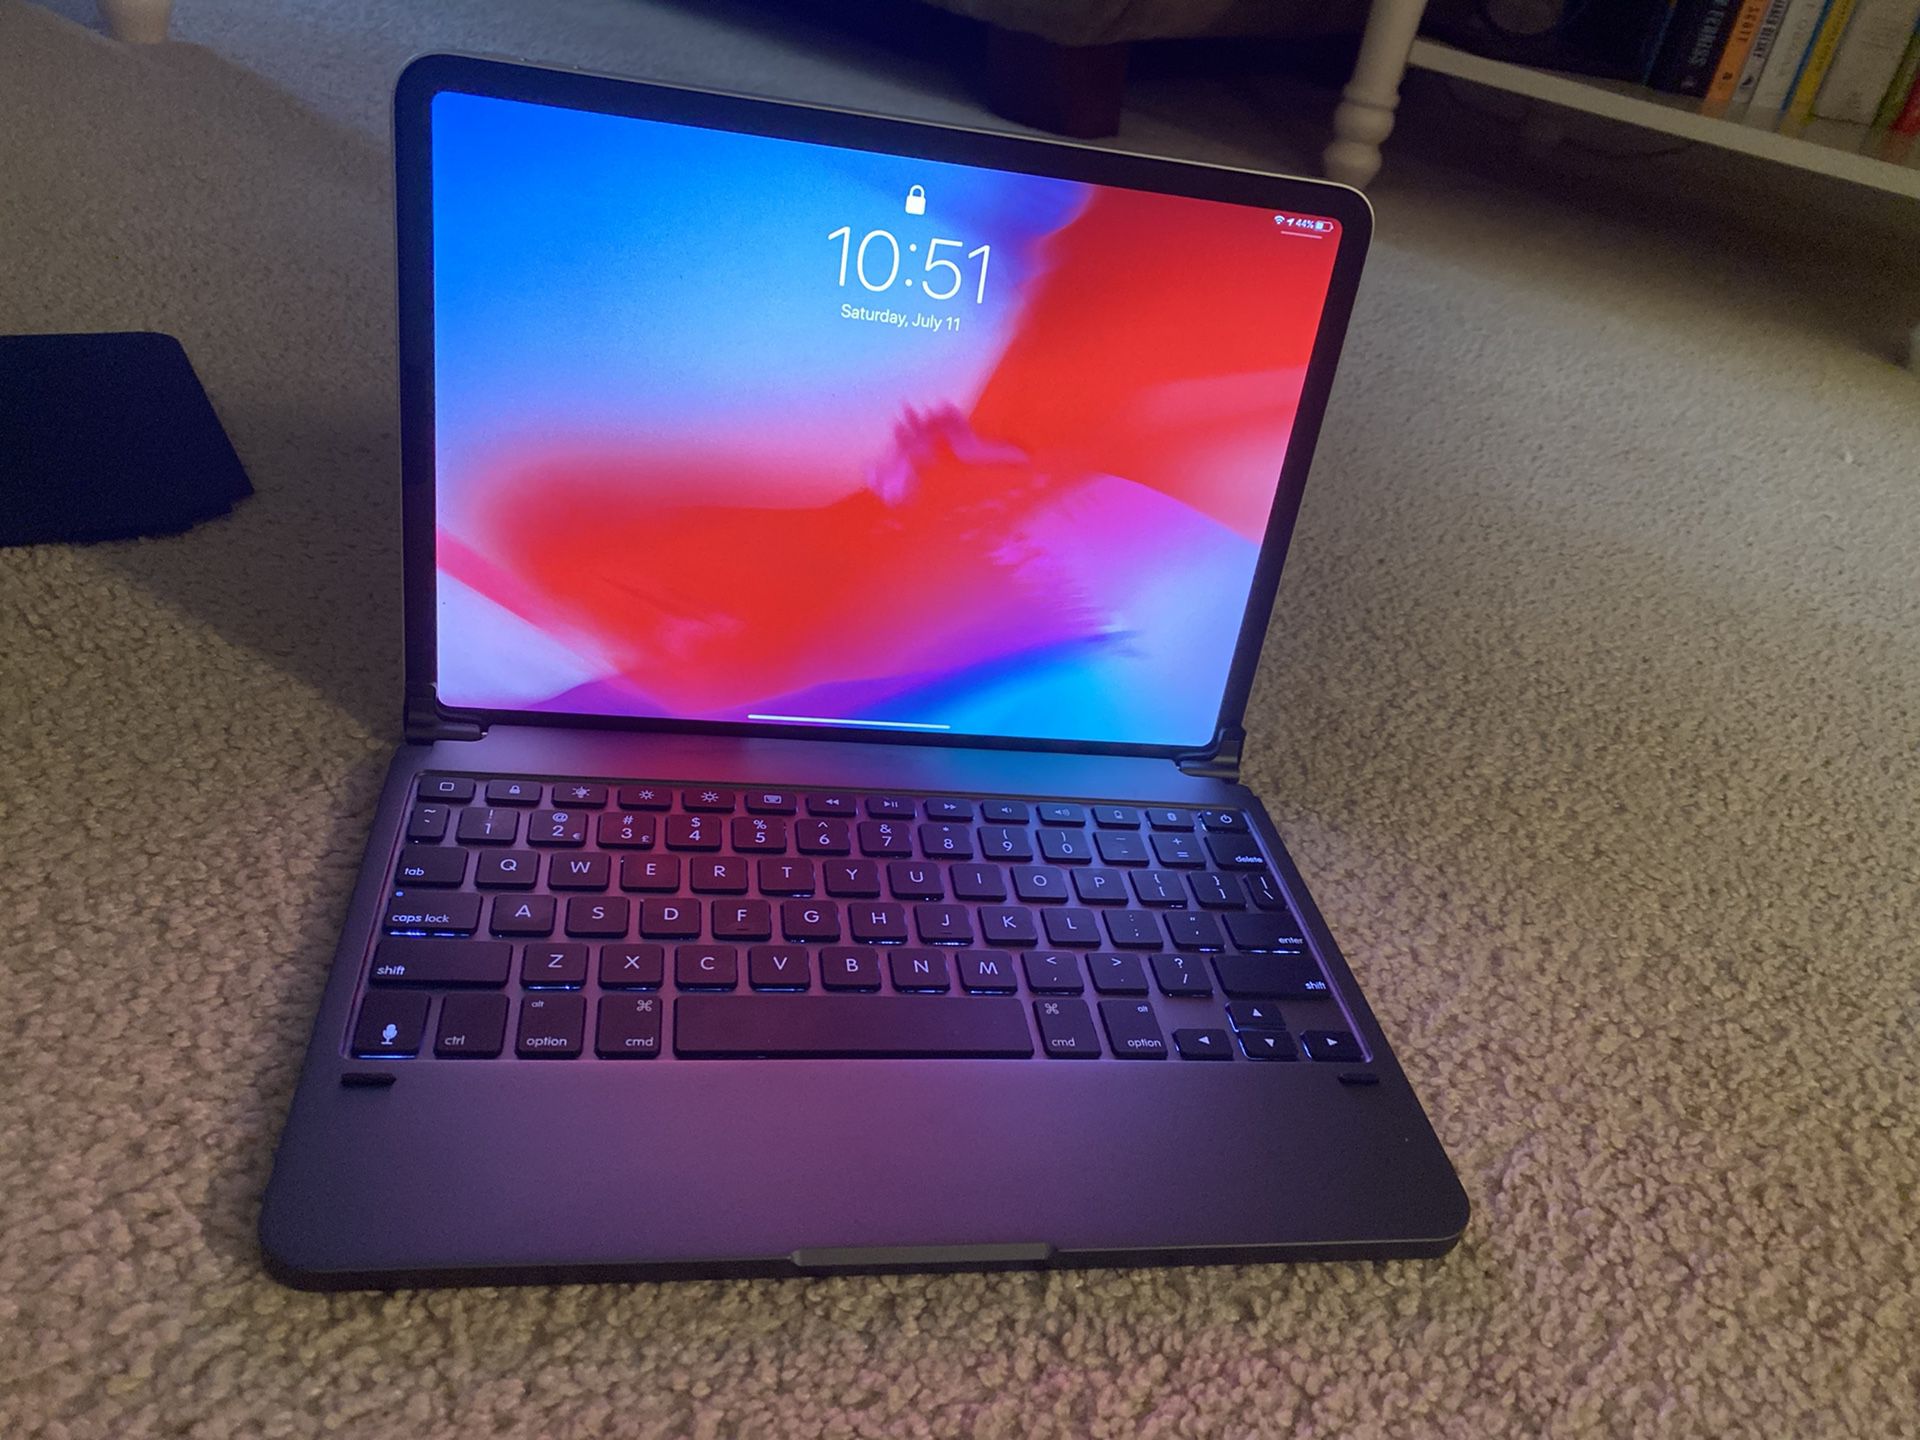 2018 iPad Pro 11 (excellent condition) 64gb WiFi. Included Brydge pro keyboard